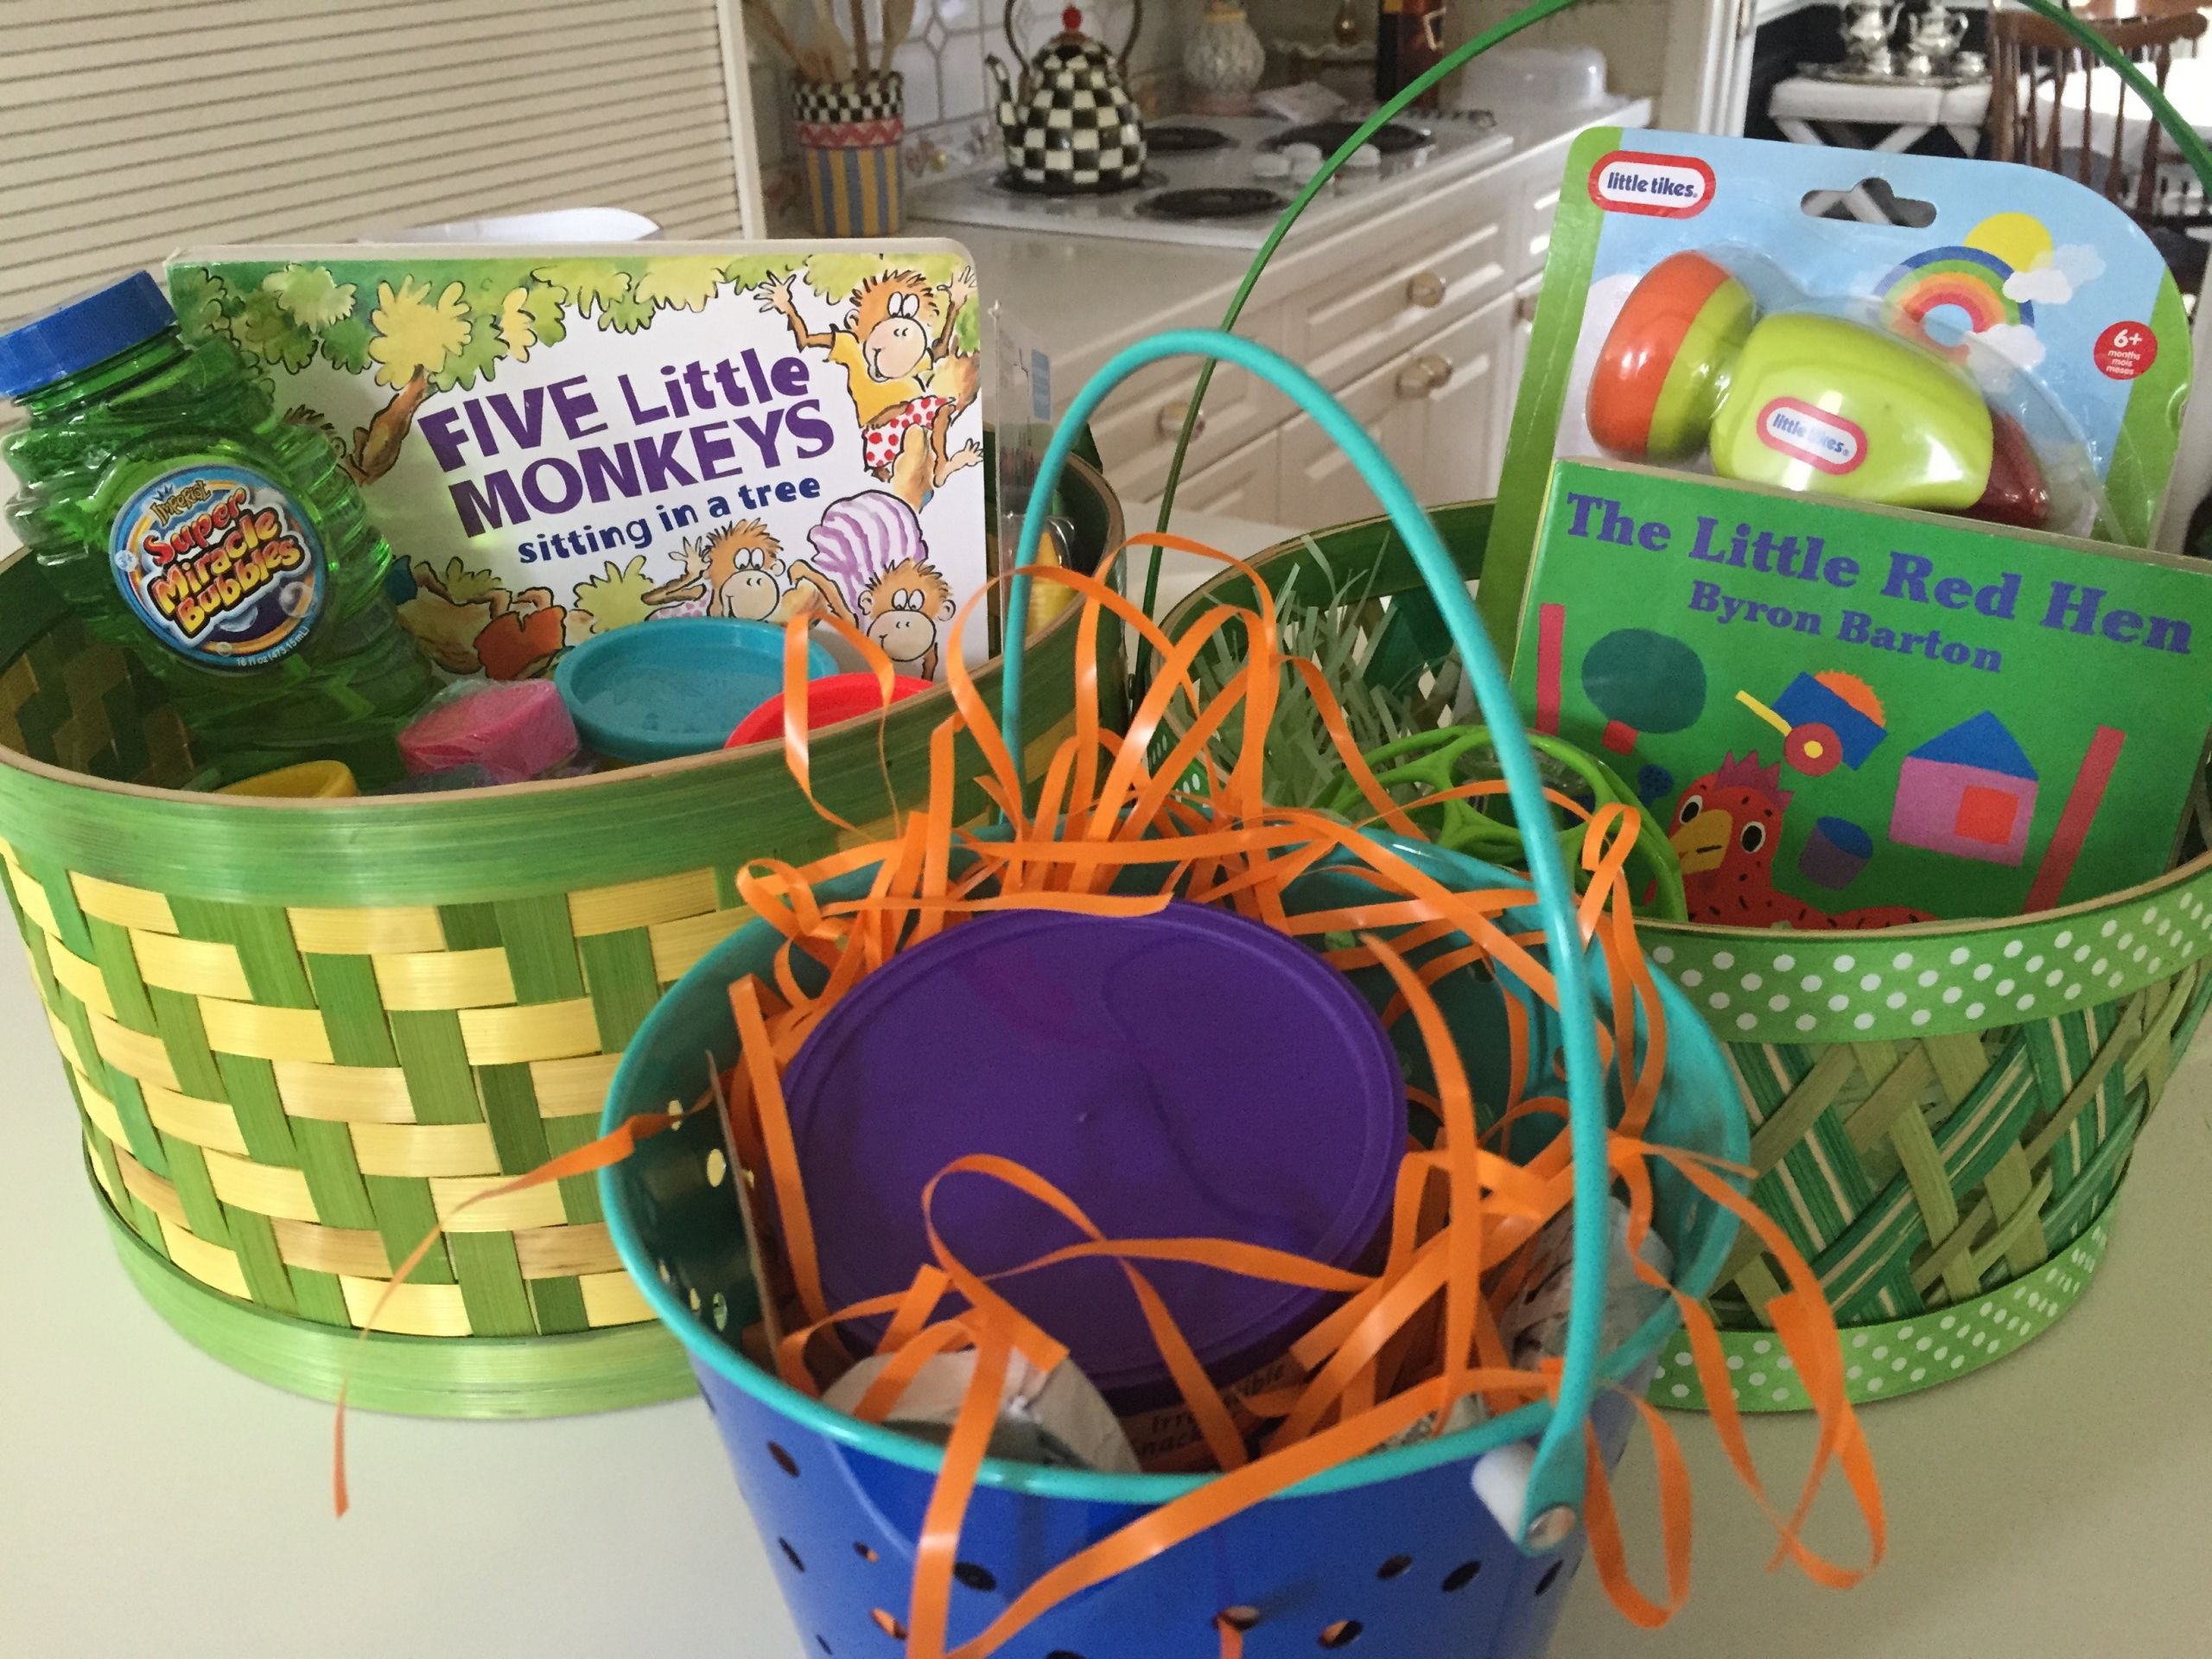 Ideas For Kids Easter Baskets
 The Best Non Candy Easter Basket Gift ideas for Kids Mom